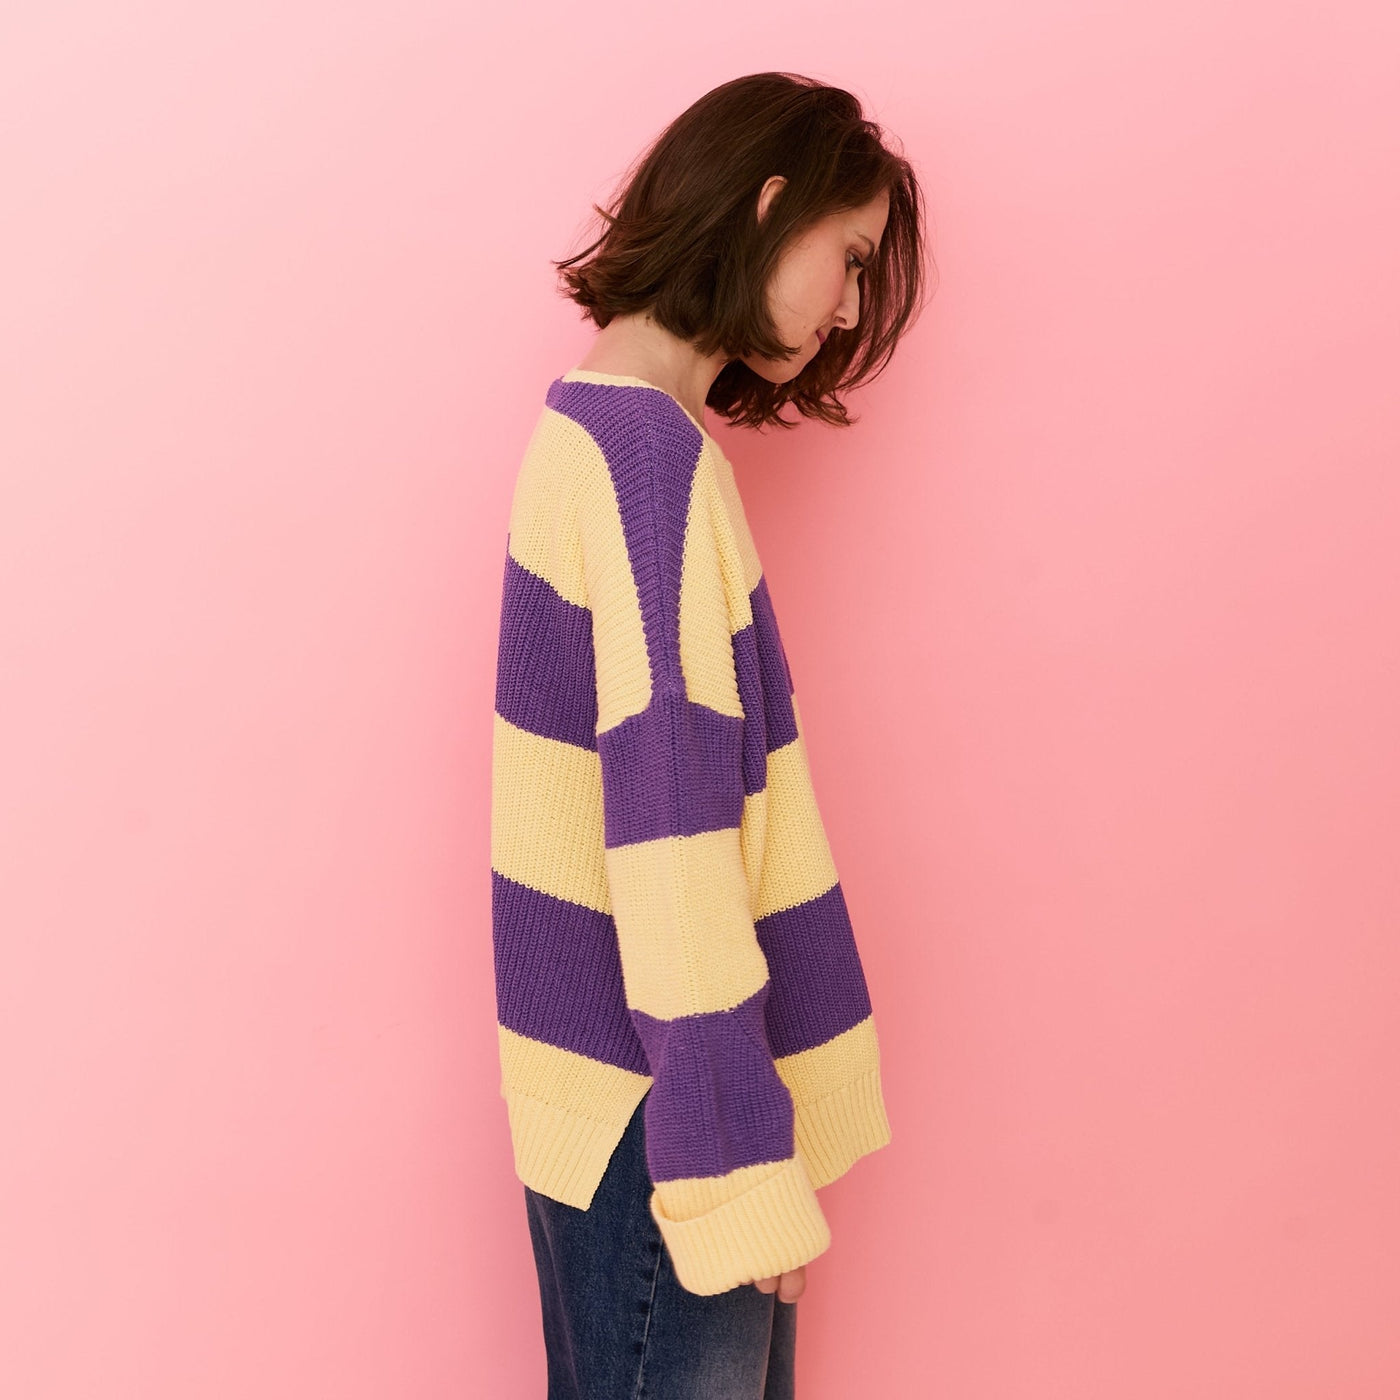 Rhiannon Recycled Cotton Mix Chunky Stripe Jumper - Purple and Yellow